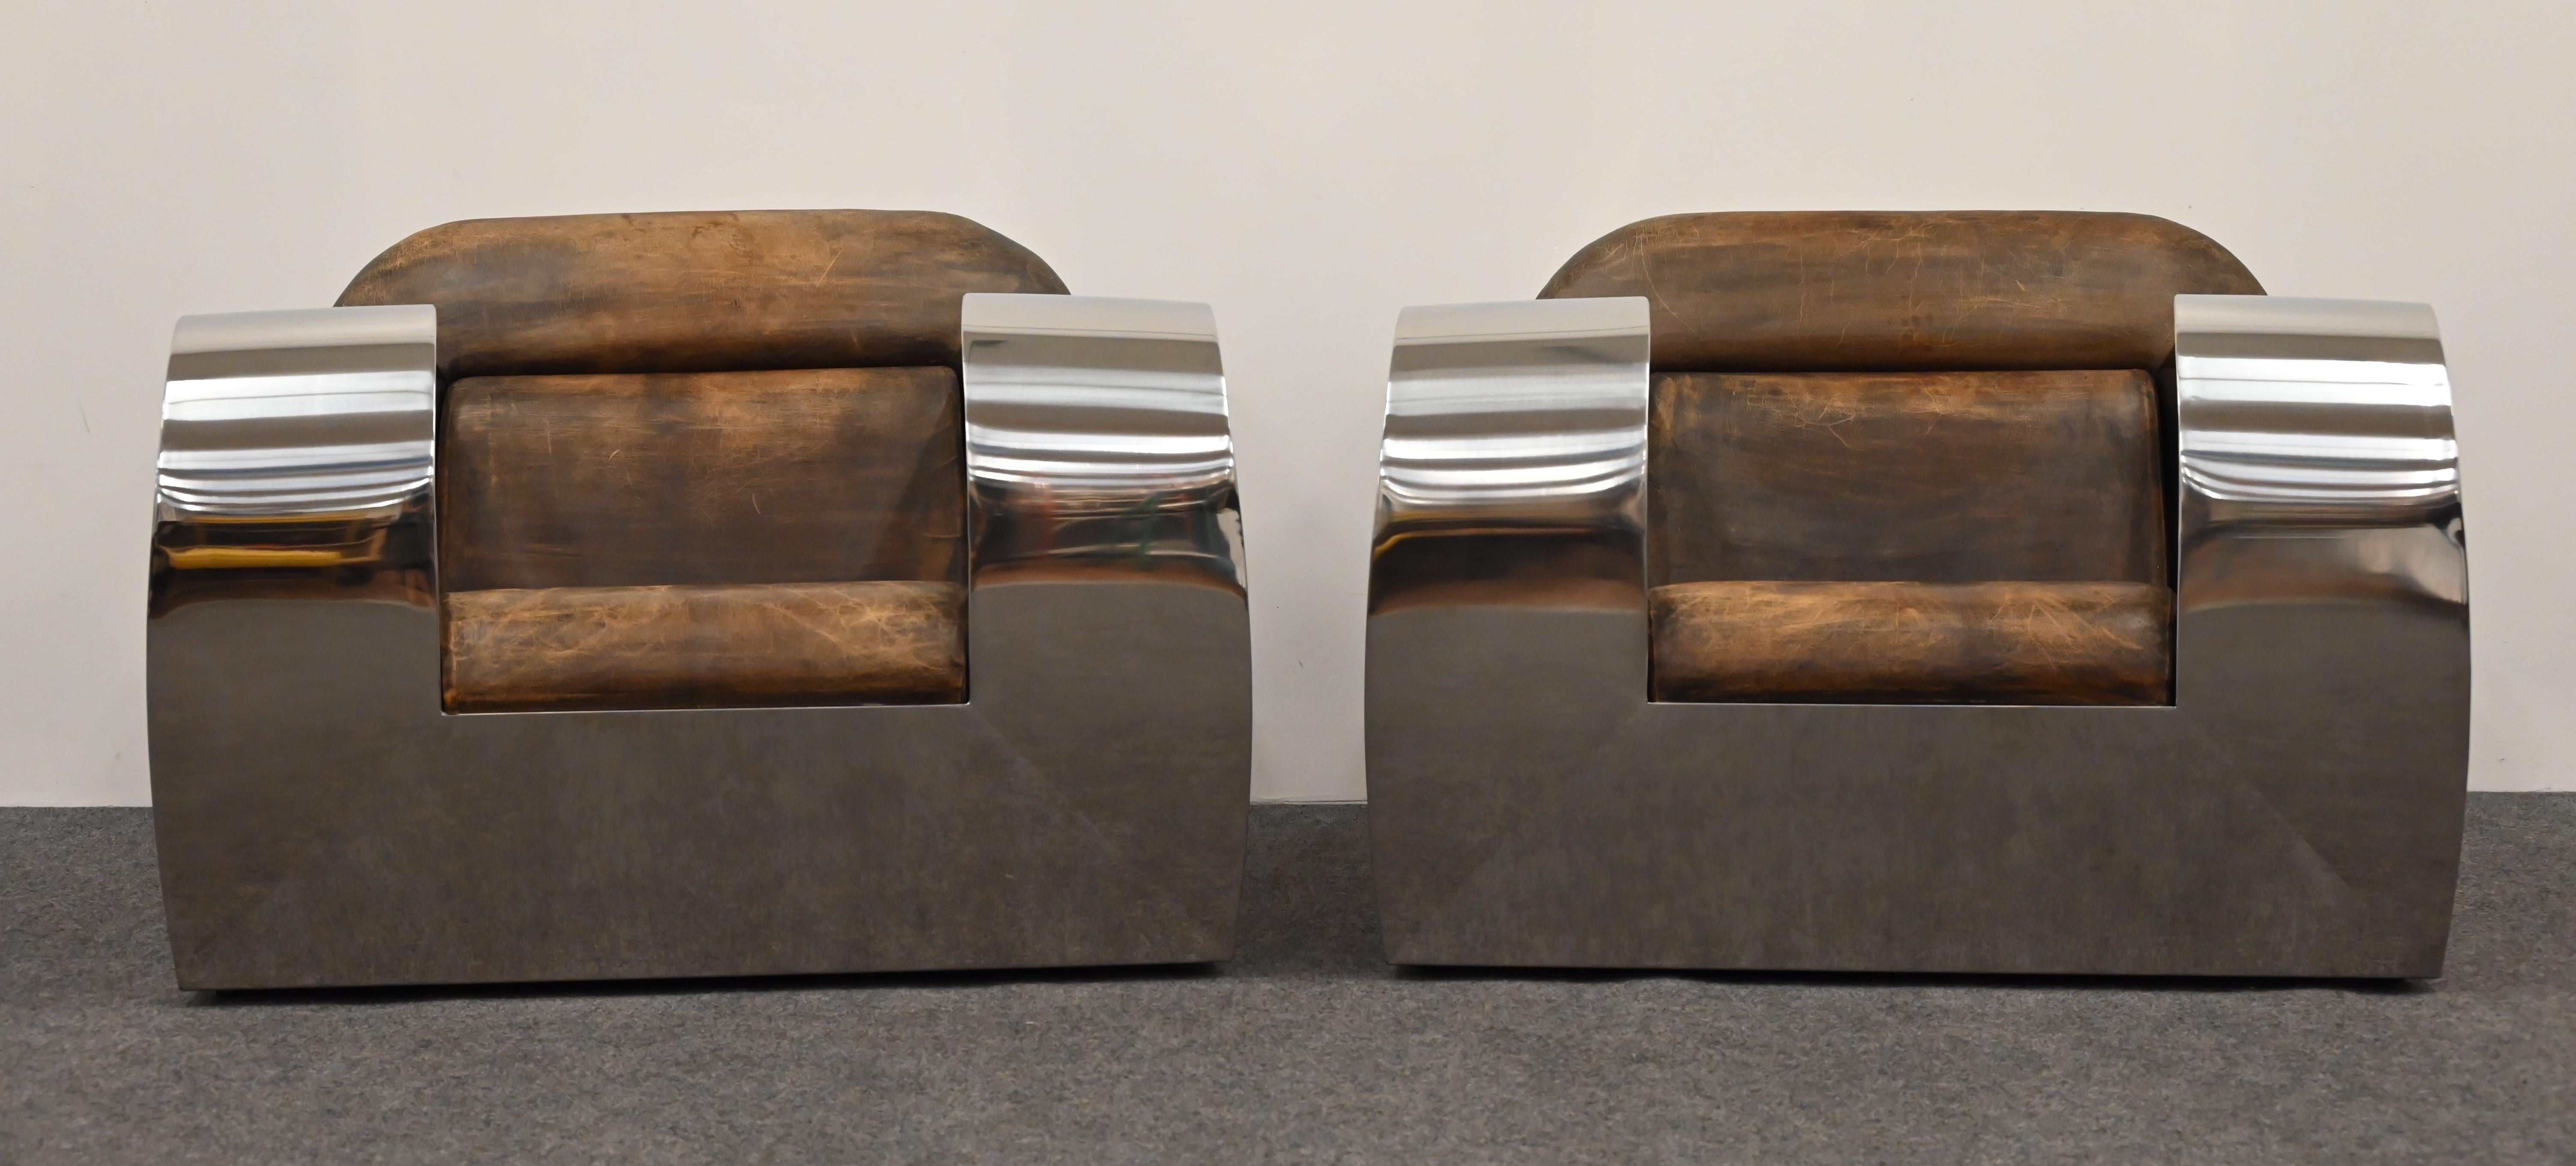 Pair of Stainless Steel Club Chairs by Jonathan Singleton, 20th Century For Sale 3